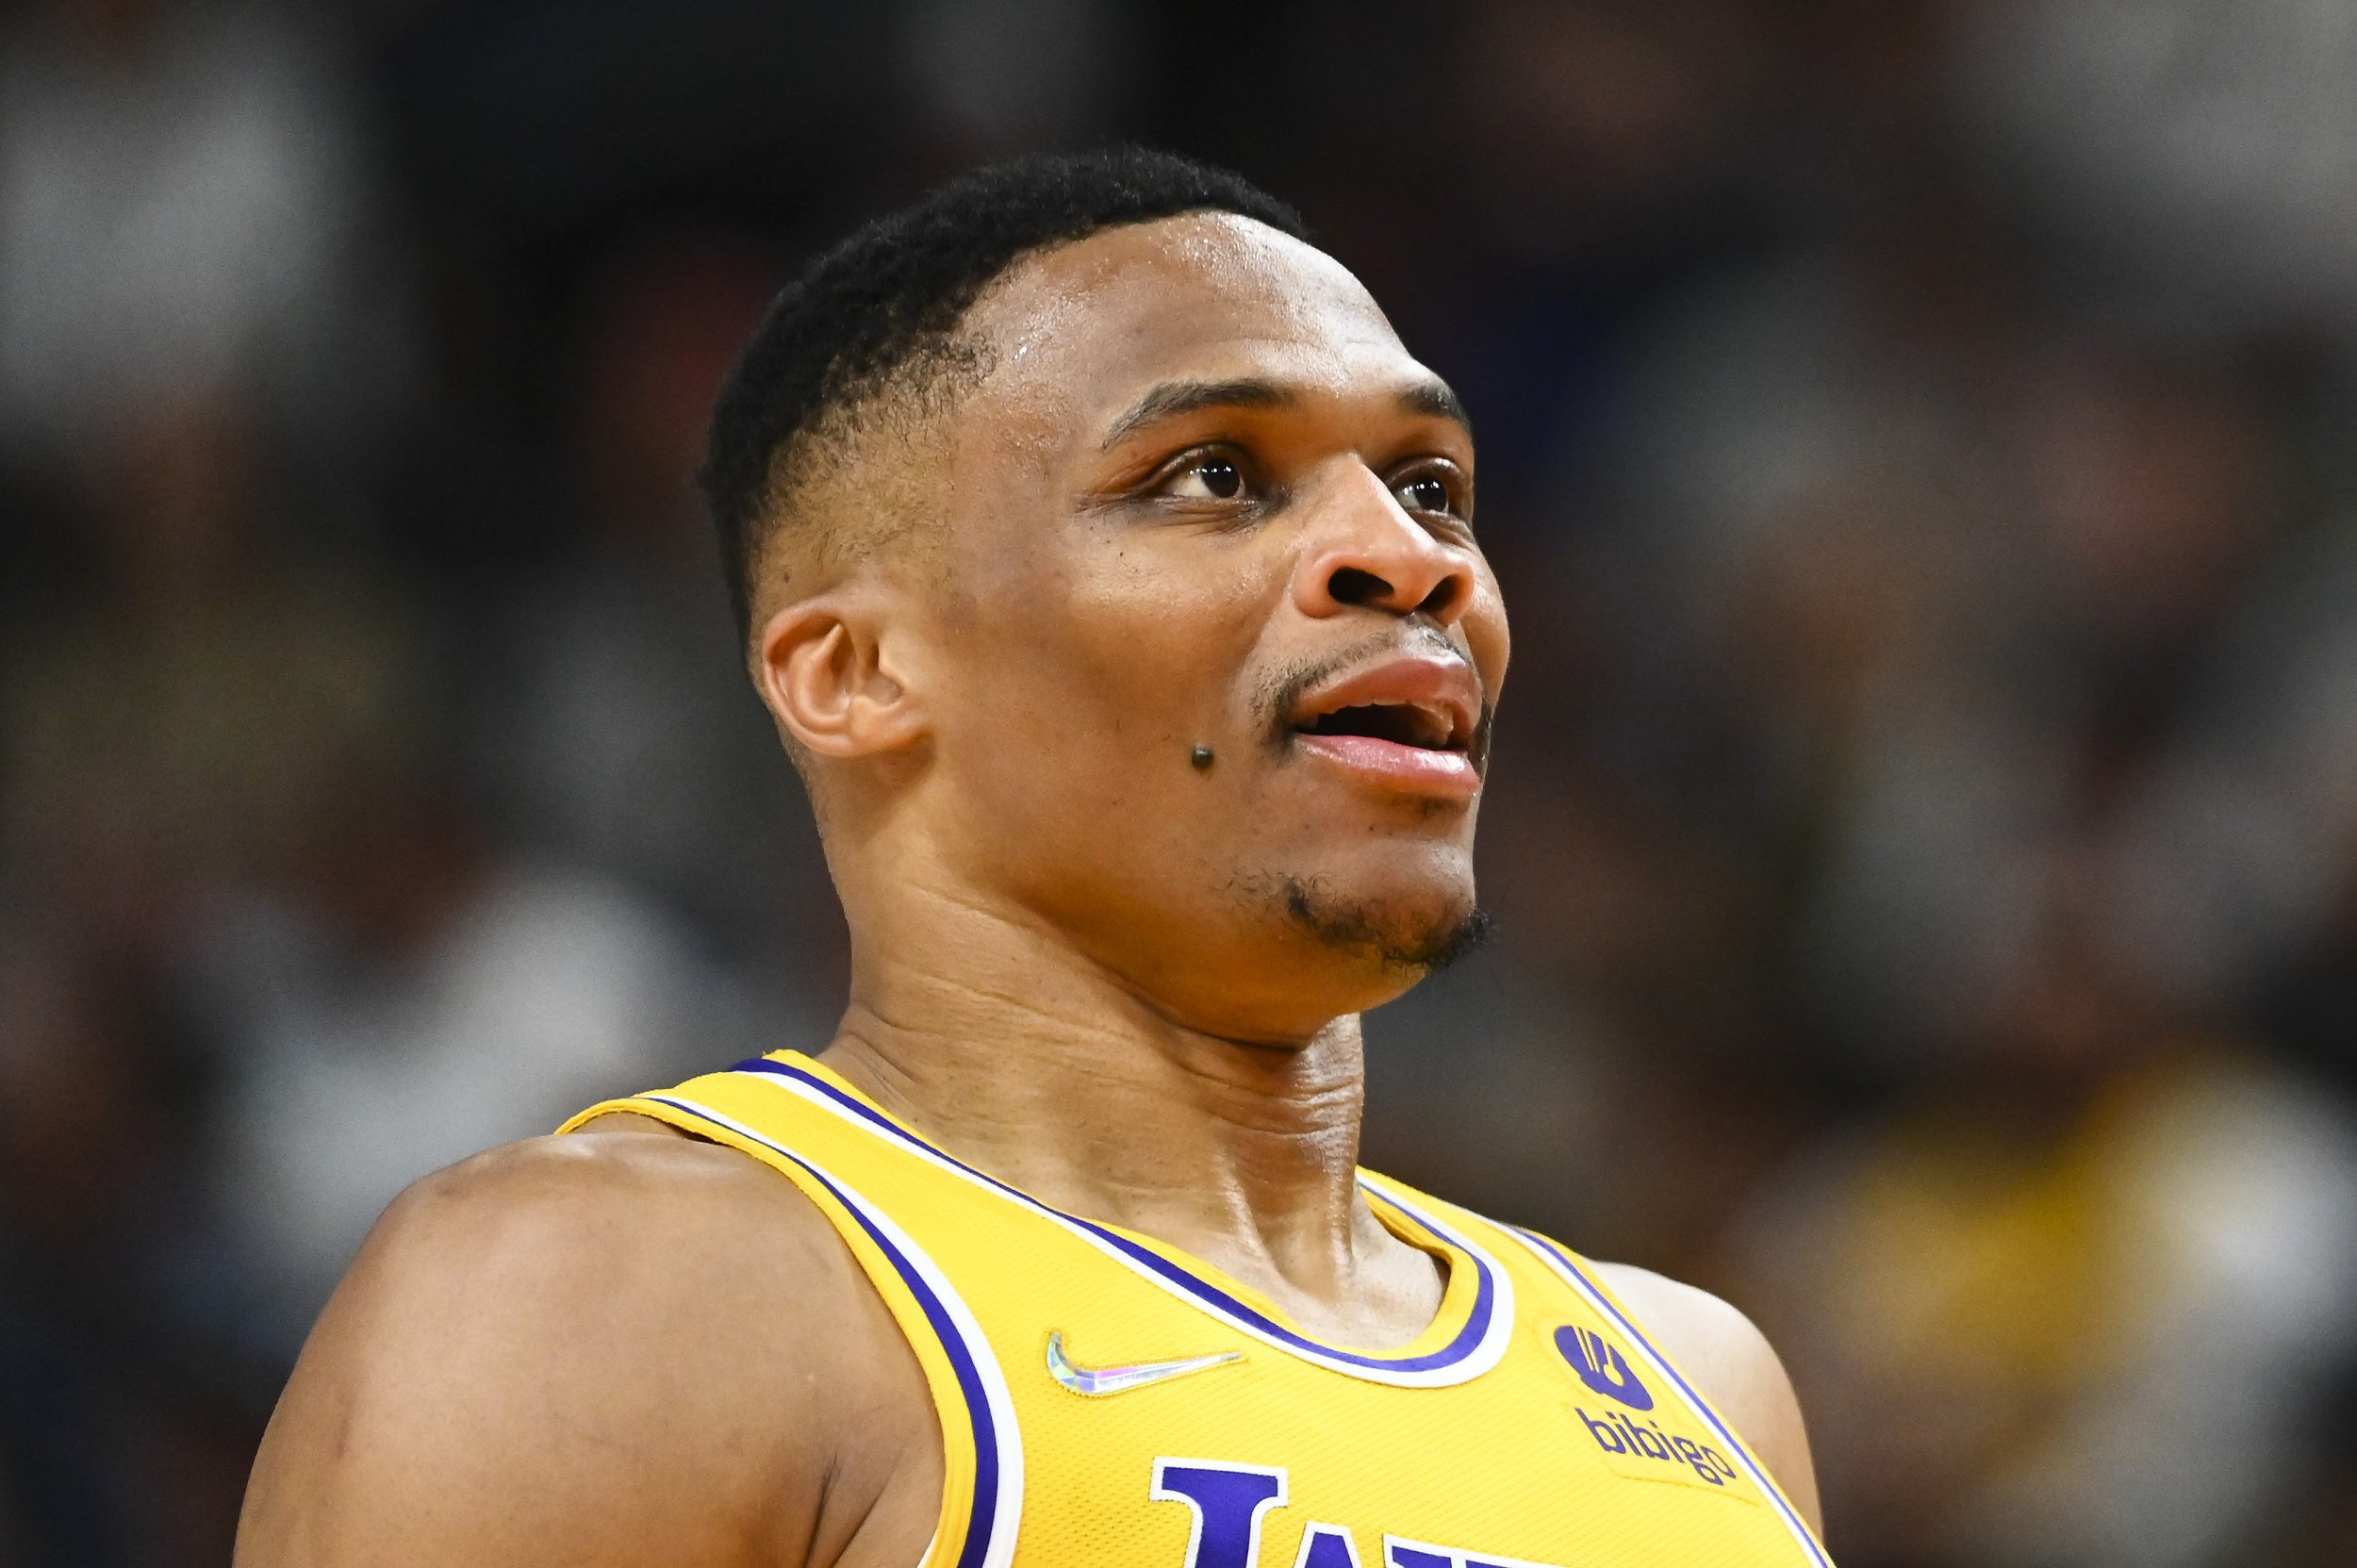 Russell Westbrook out to prove he can be a leader for Clippers